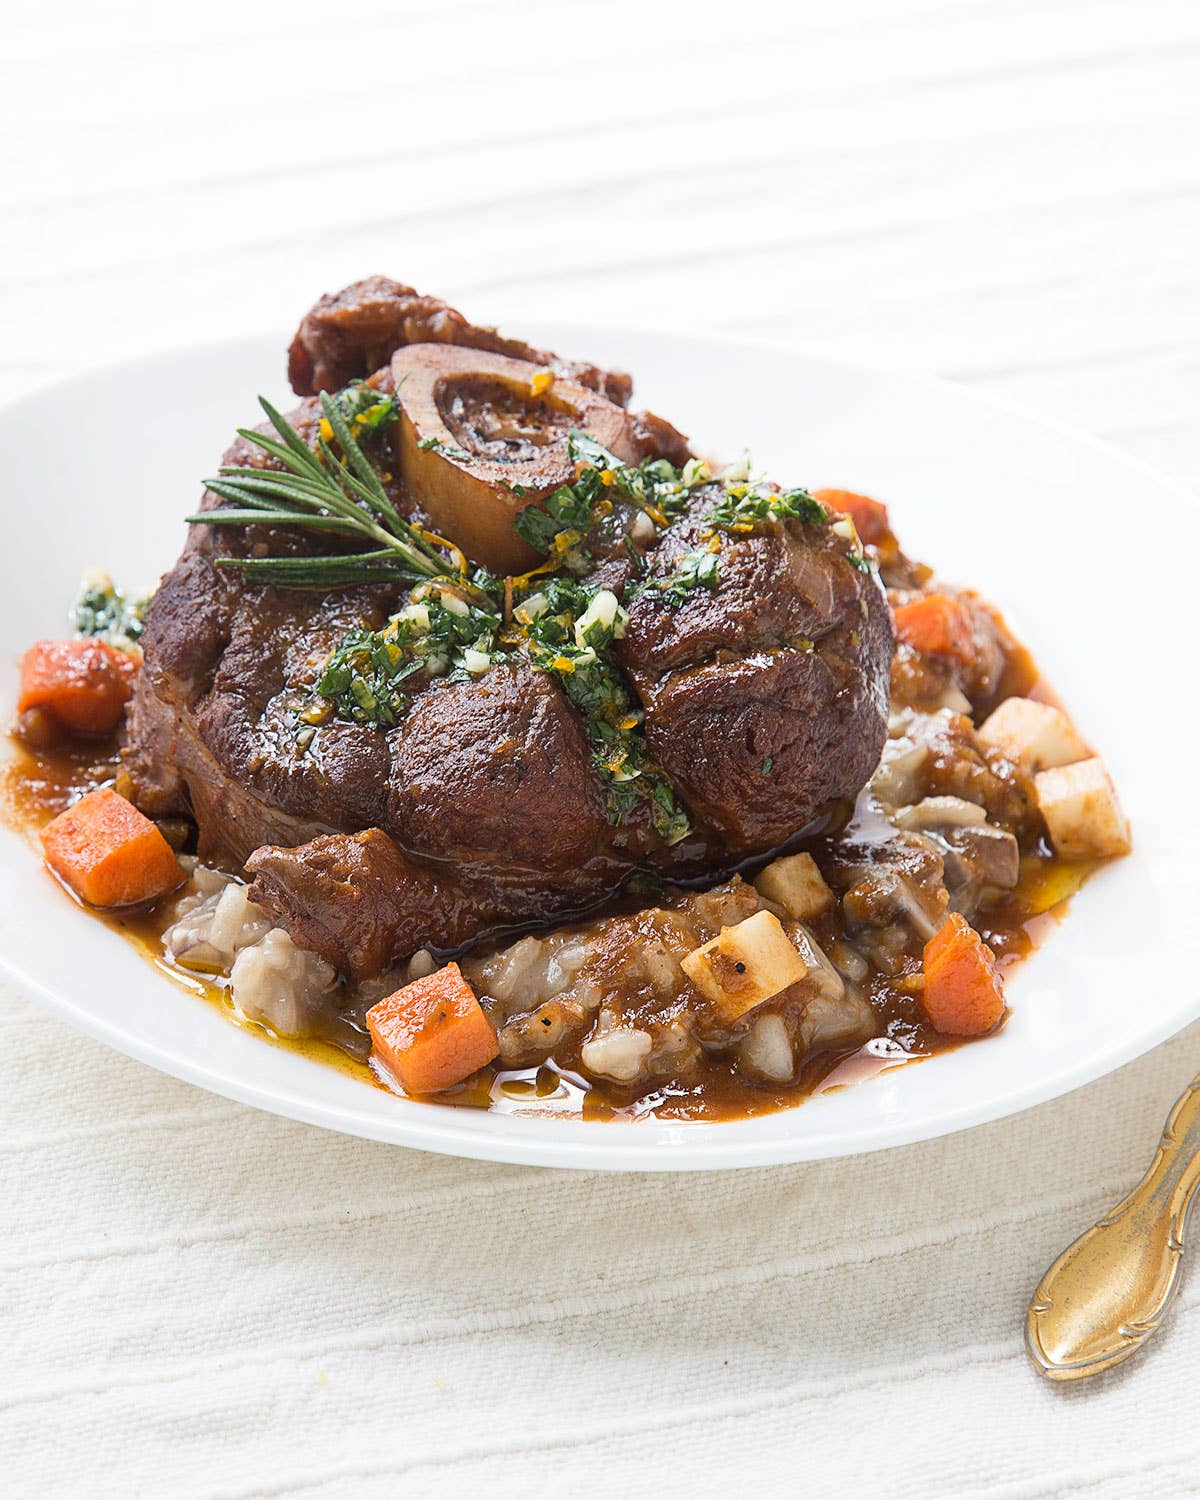 Braised Veal Osso Bucco with Gremolata and Porcini Risotto